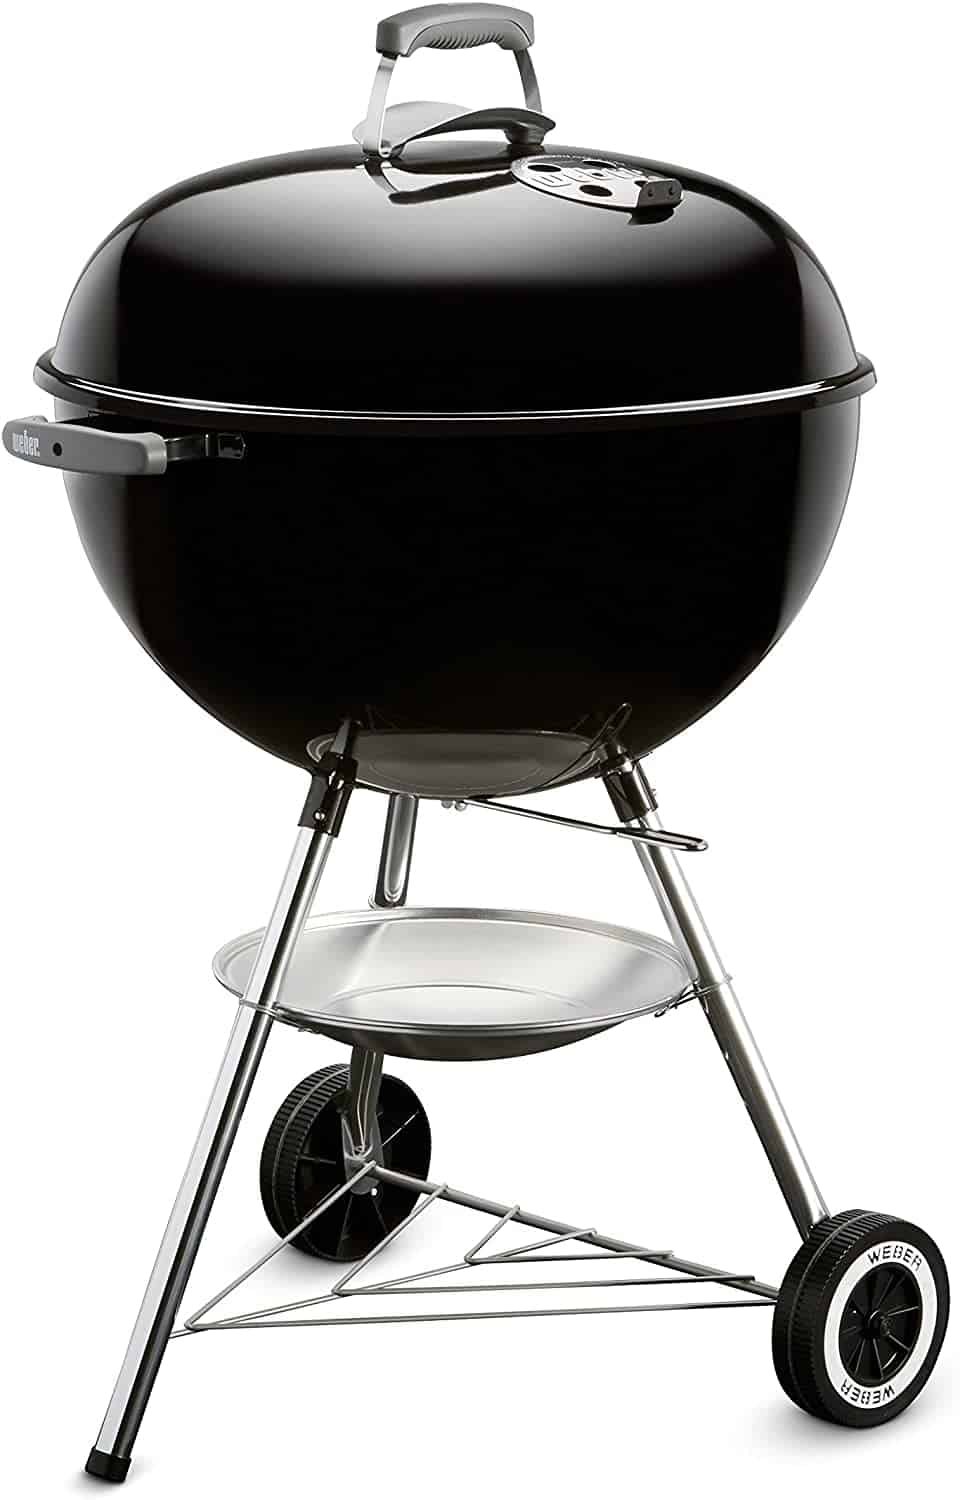 Charcoal grill with lid on